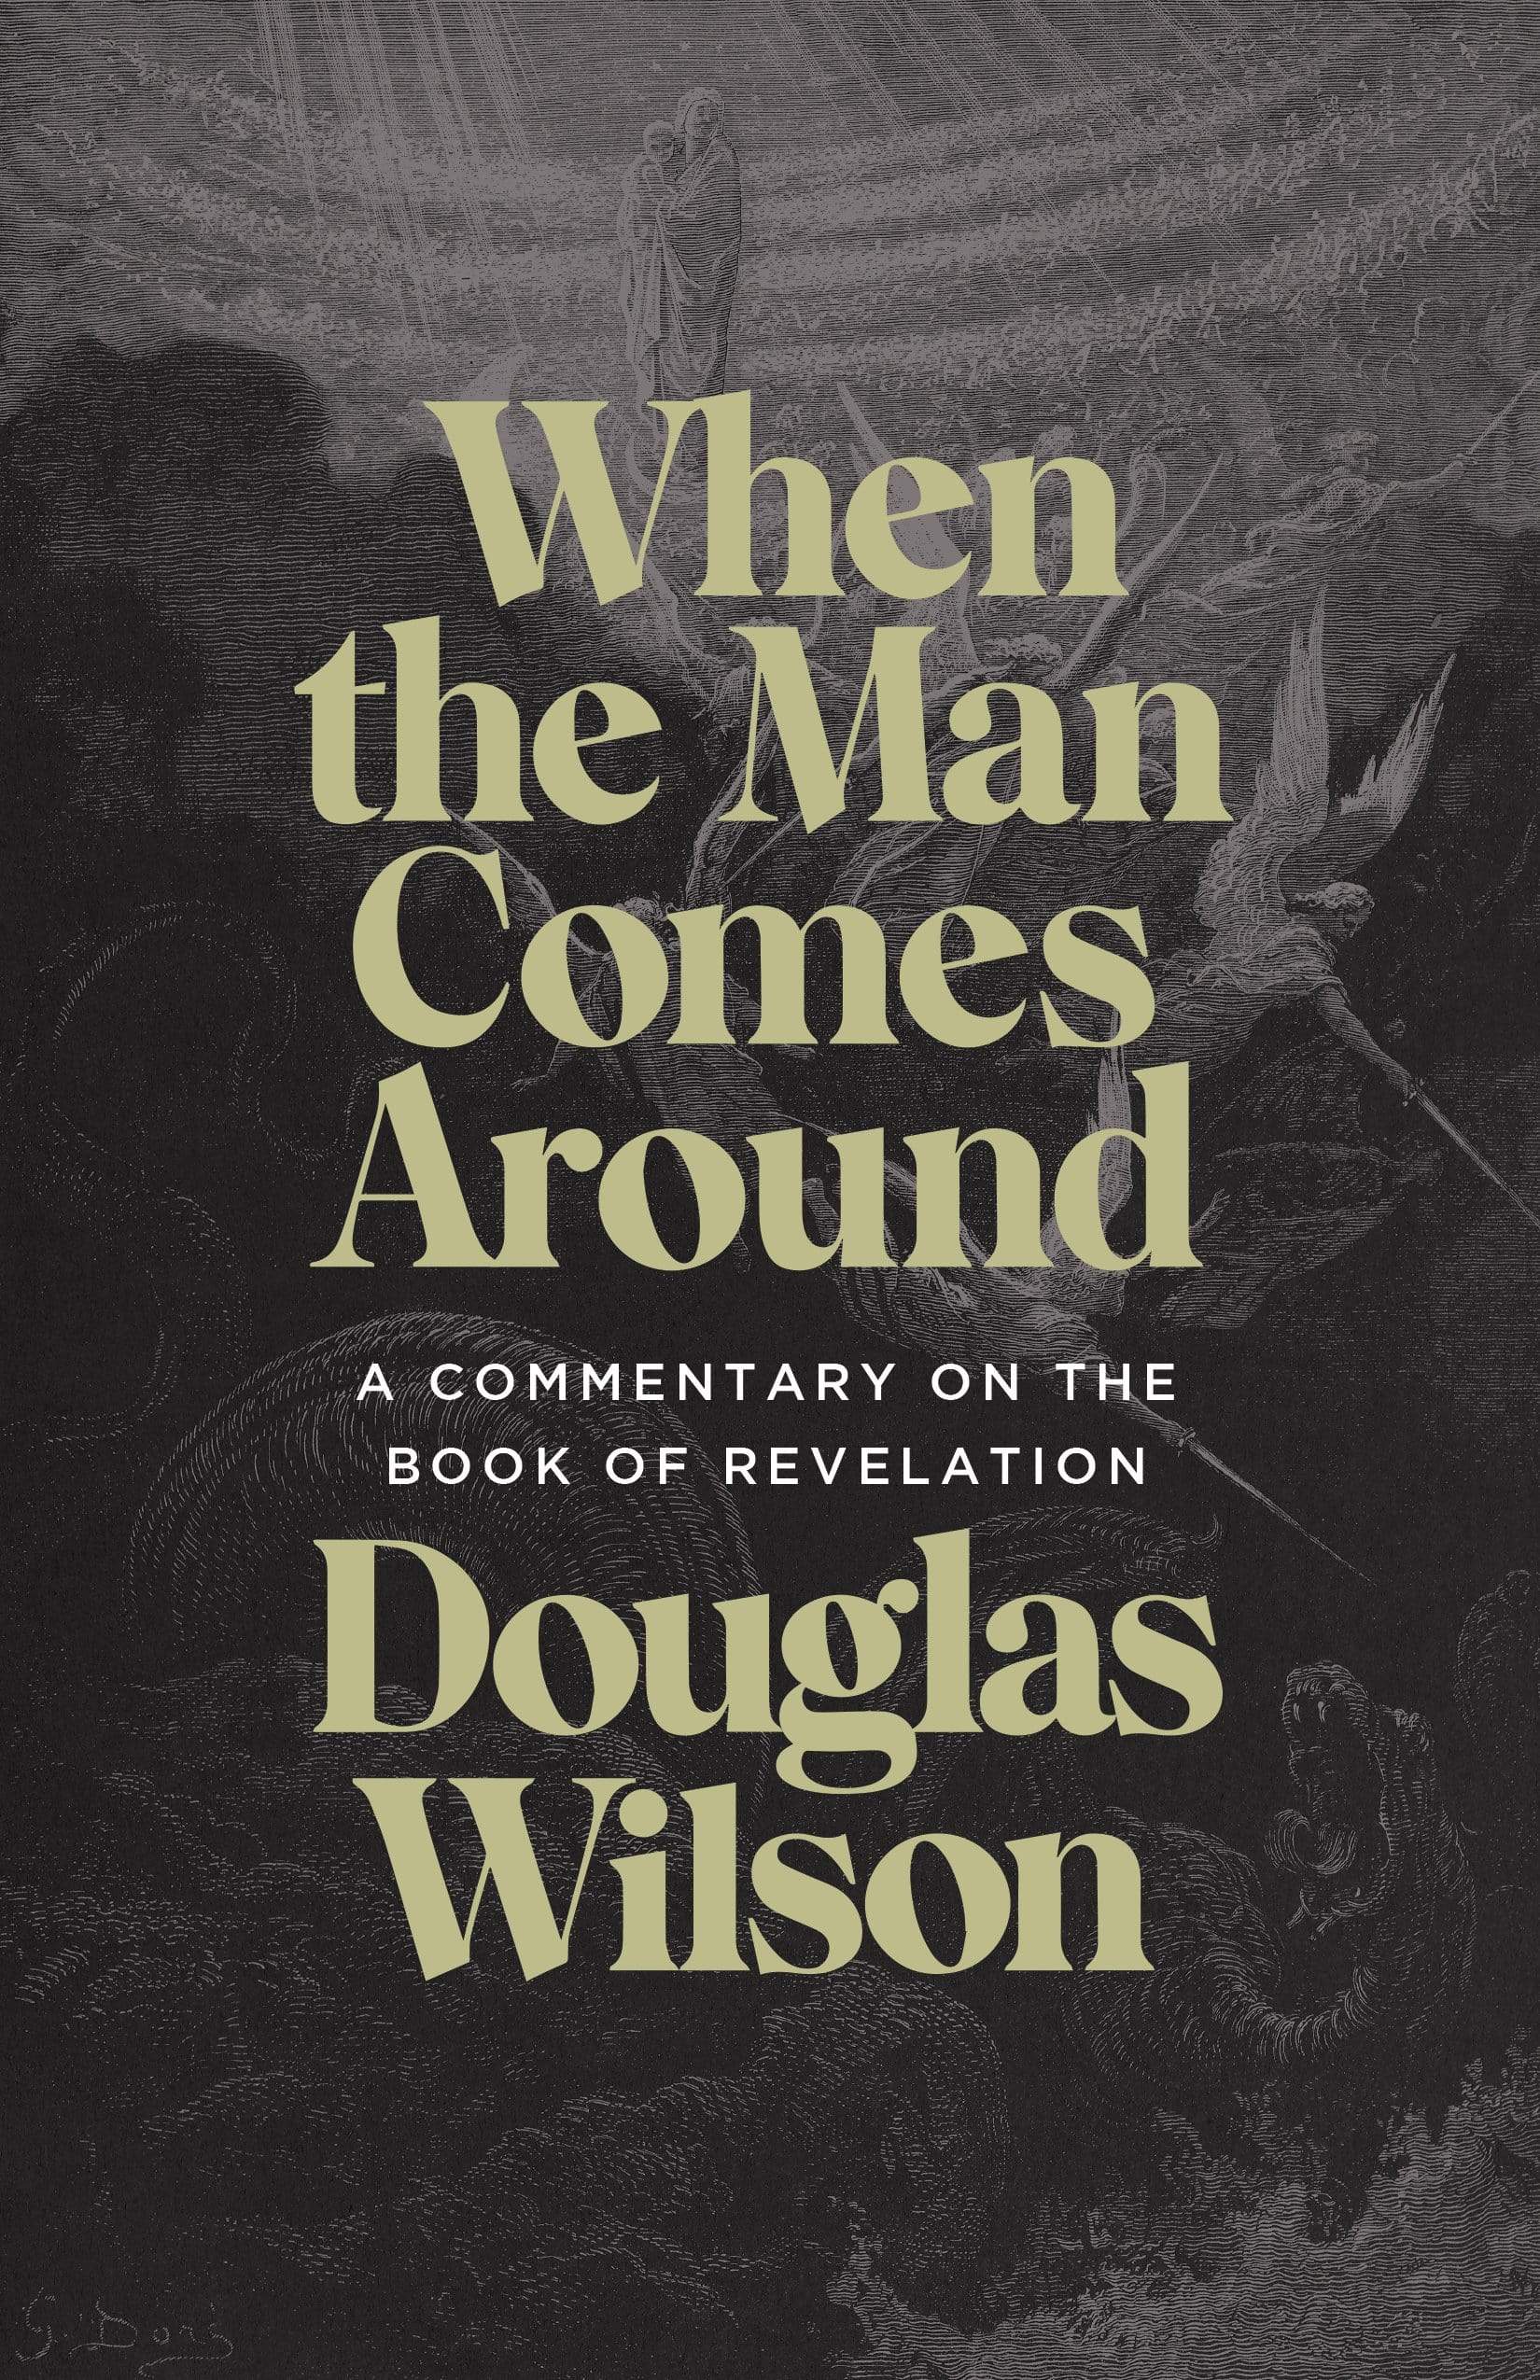 When the Man Comes Around: A Commentary on the Book of Revelation by Douglas Wilson. It shows art by Gustav Dore of angels announcing judgment.